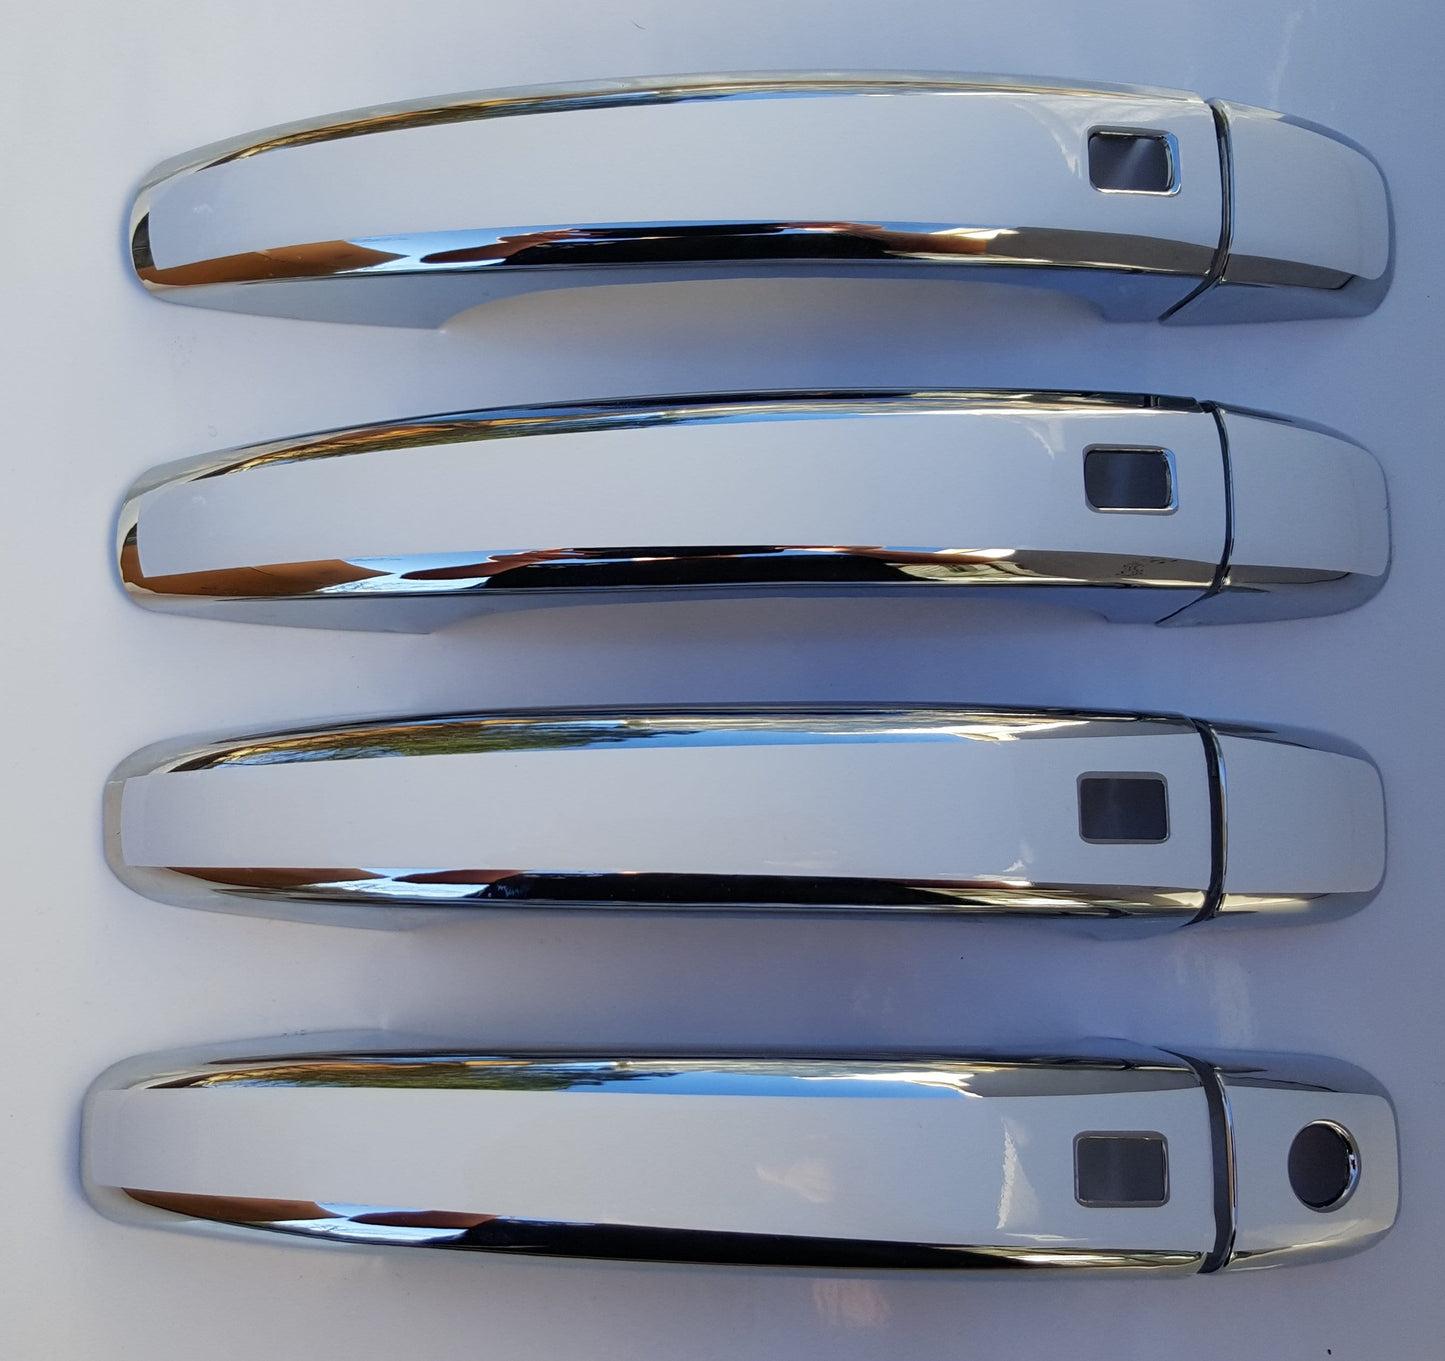 Full Set of Custom Chrome Door Handle Overlays / Covers For the 2009 – 2016 Audi A5 -- You Choose the Middle Color Insert